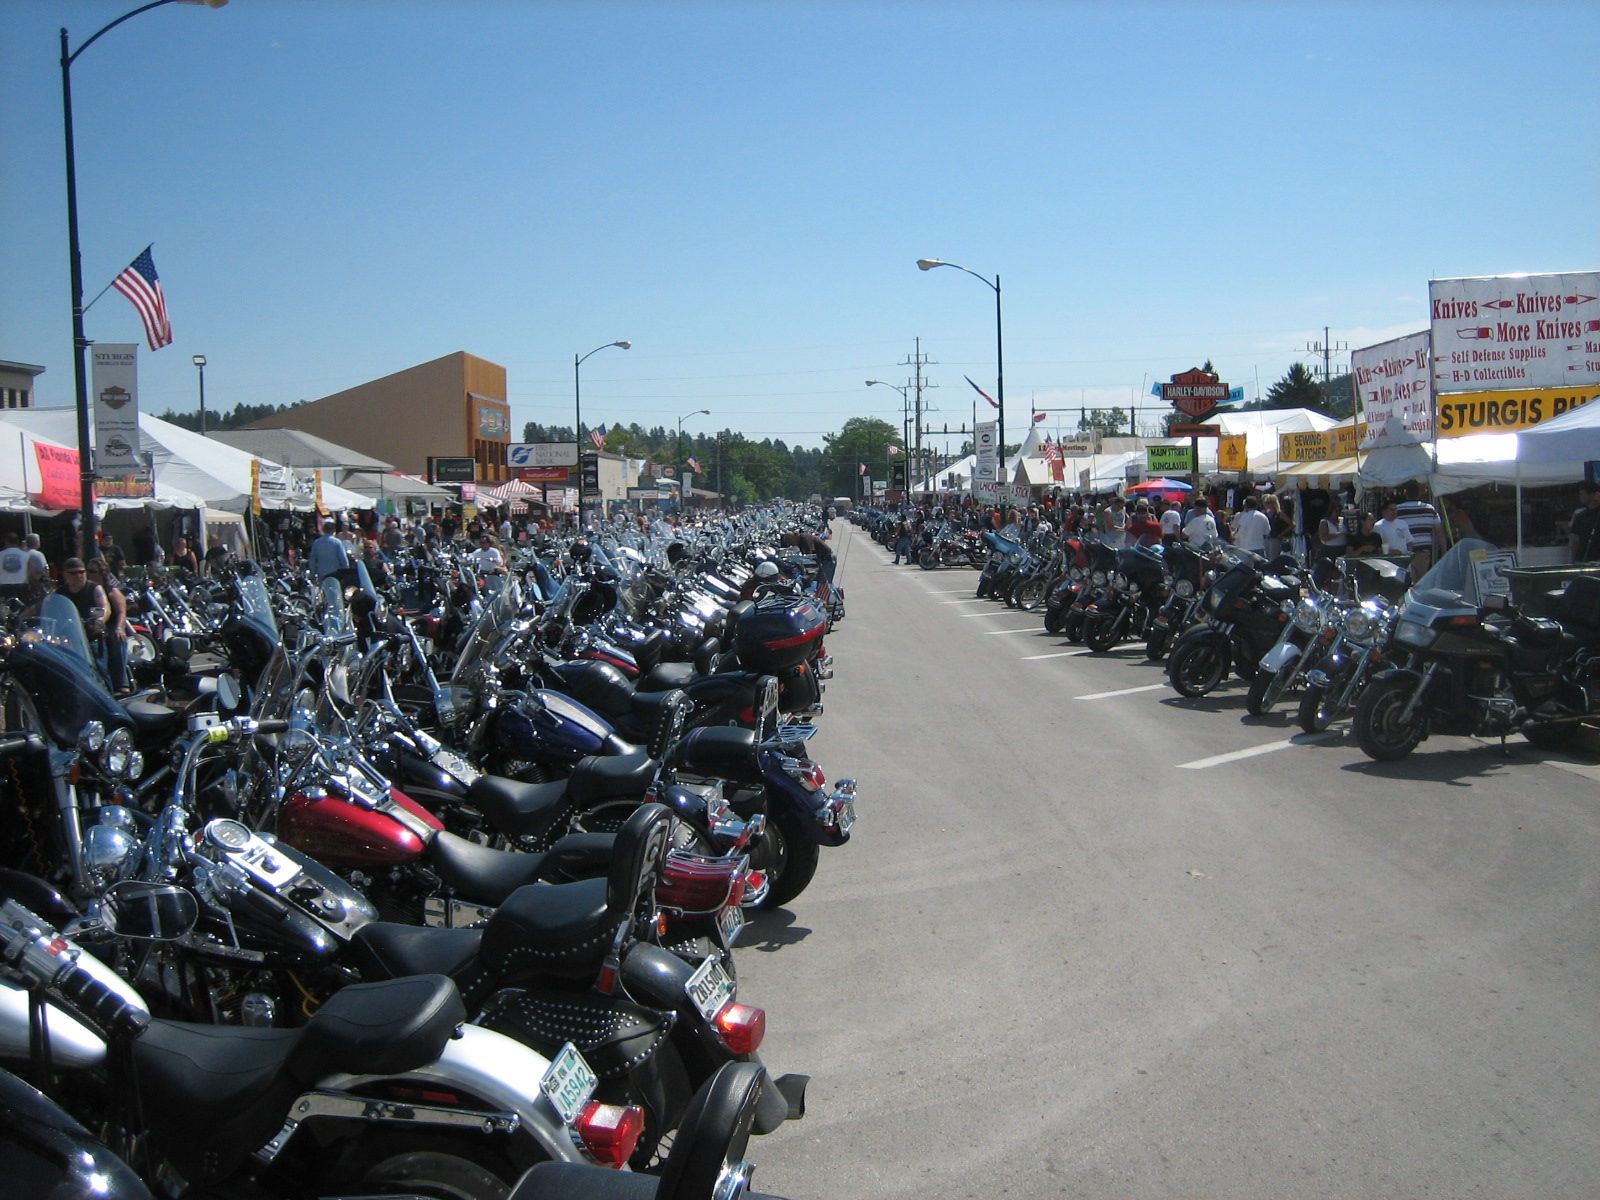 Sturgis bike week pictures dowload 3d hd pictures